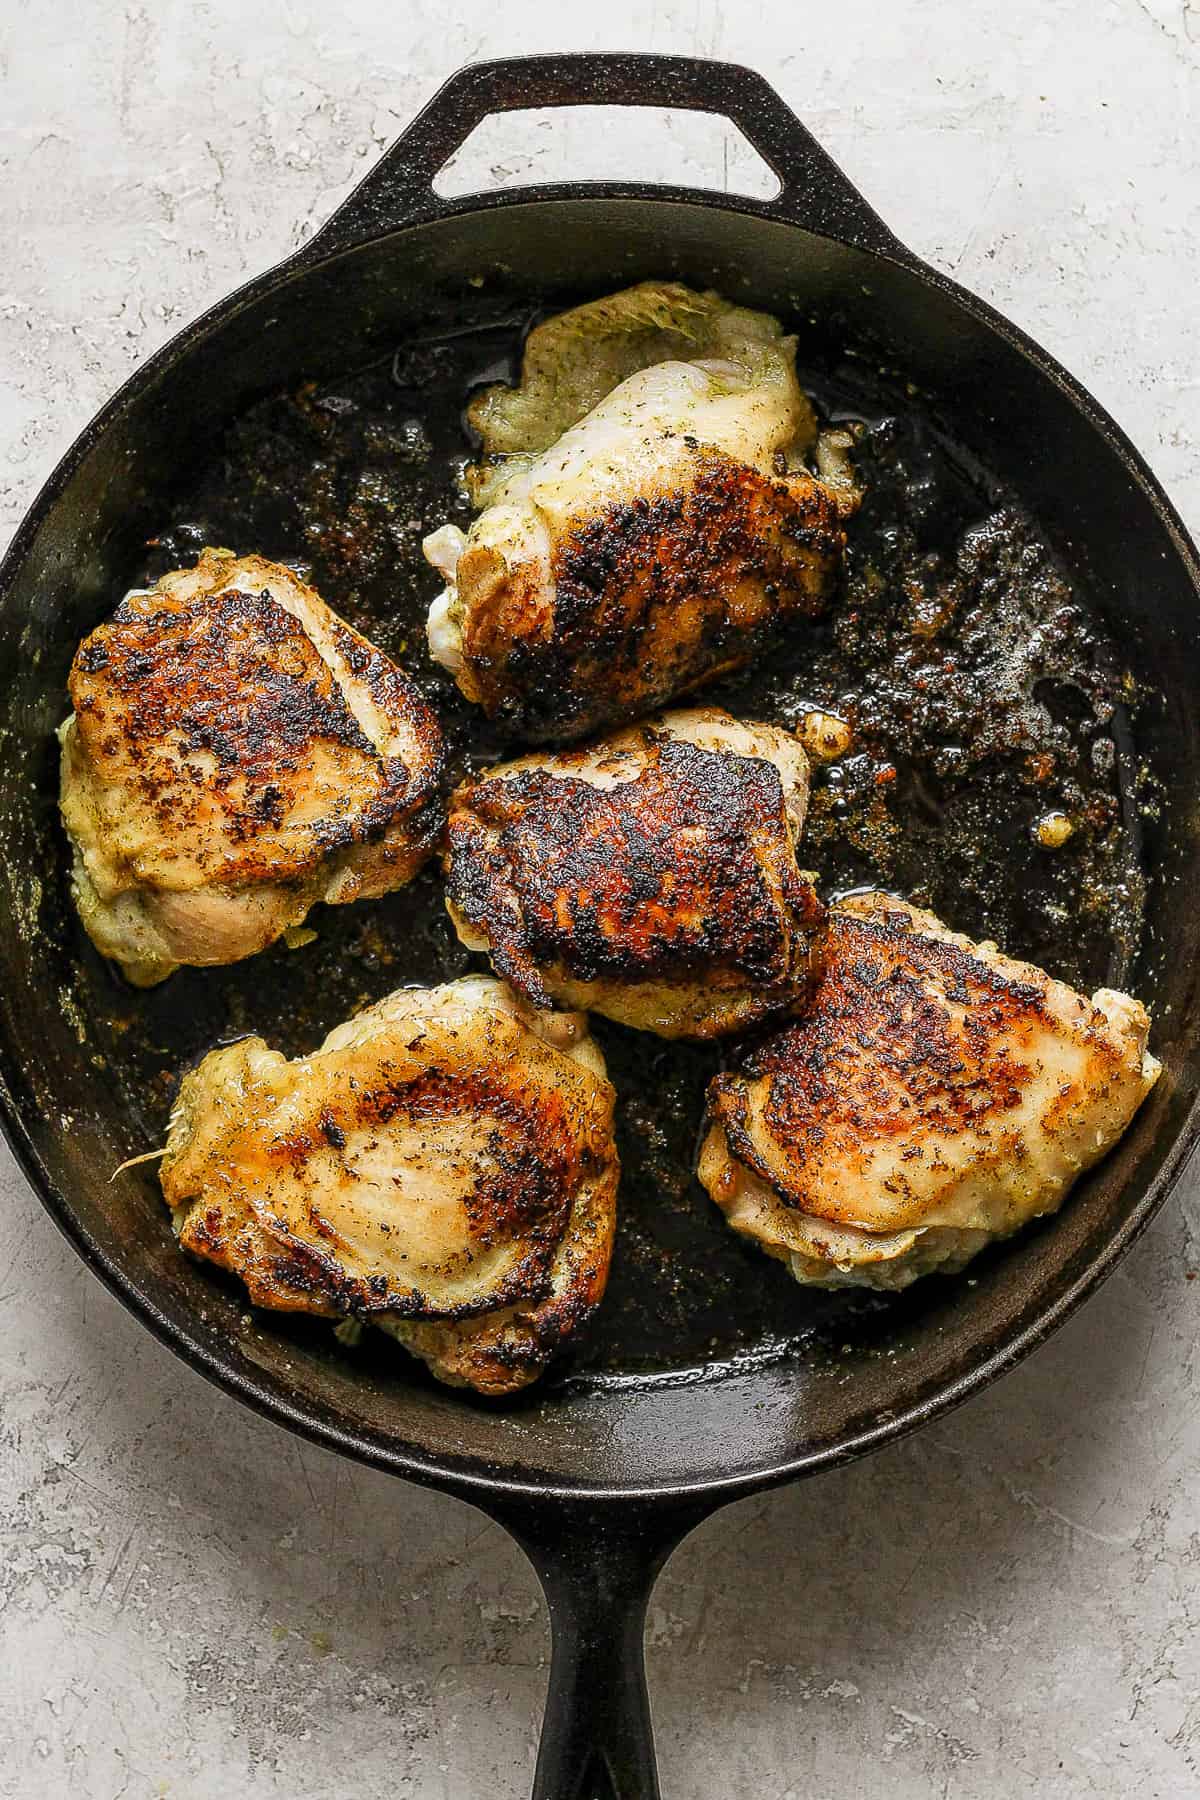 Cilantro lime chicken in a skillet with crispy golden-brown skin.